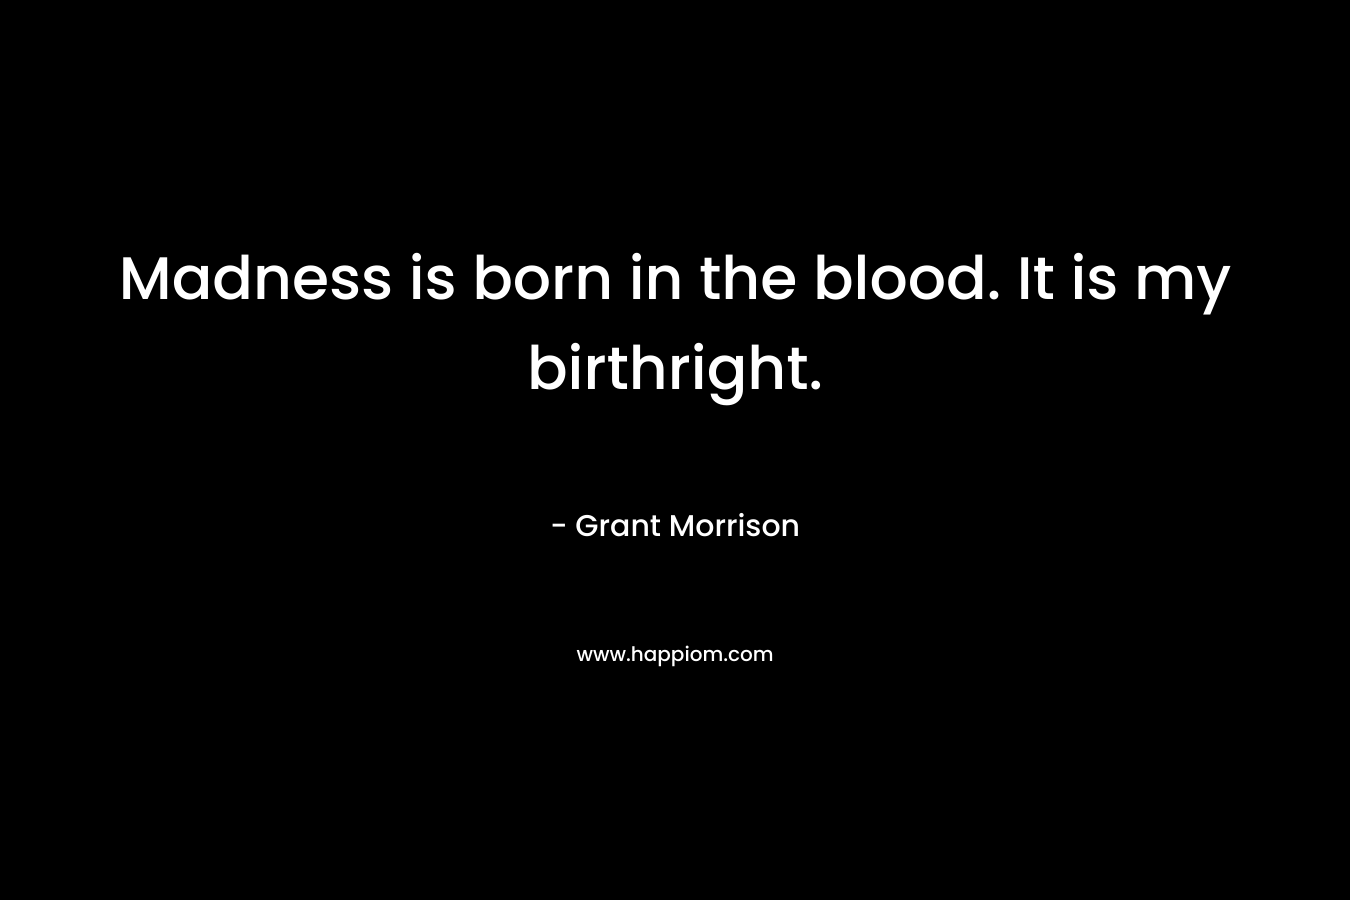 Madness is born in the blood. It is my birthright. – Grant Morrison